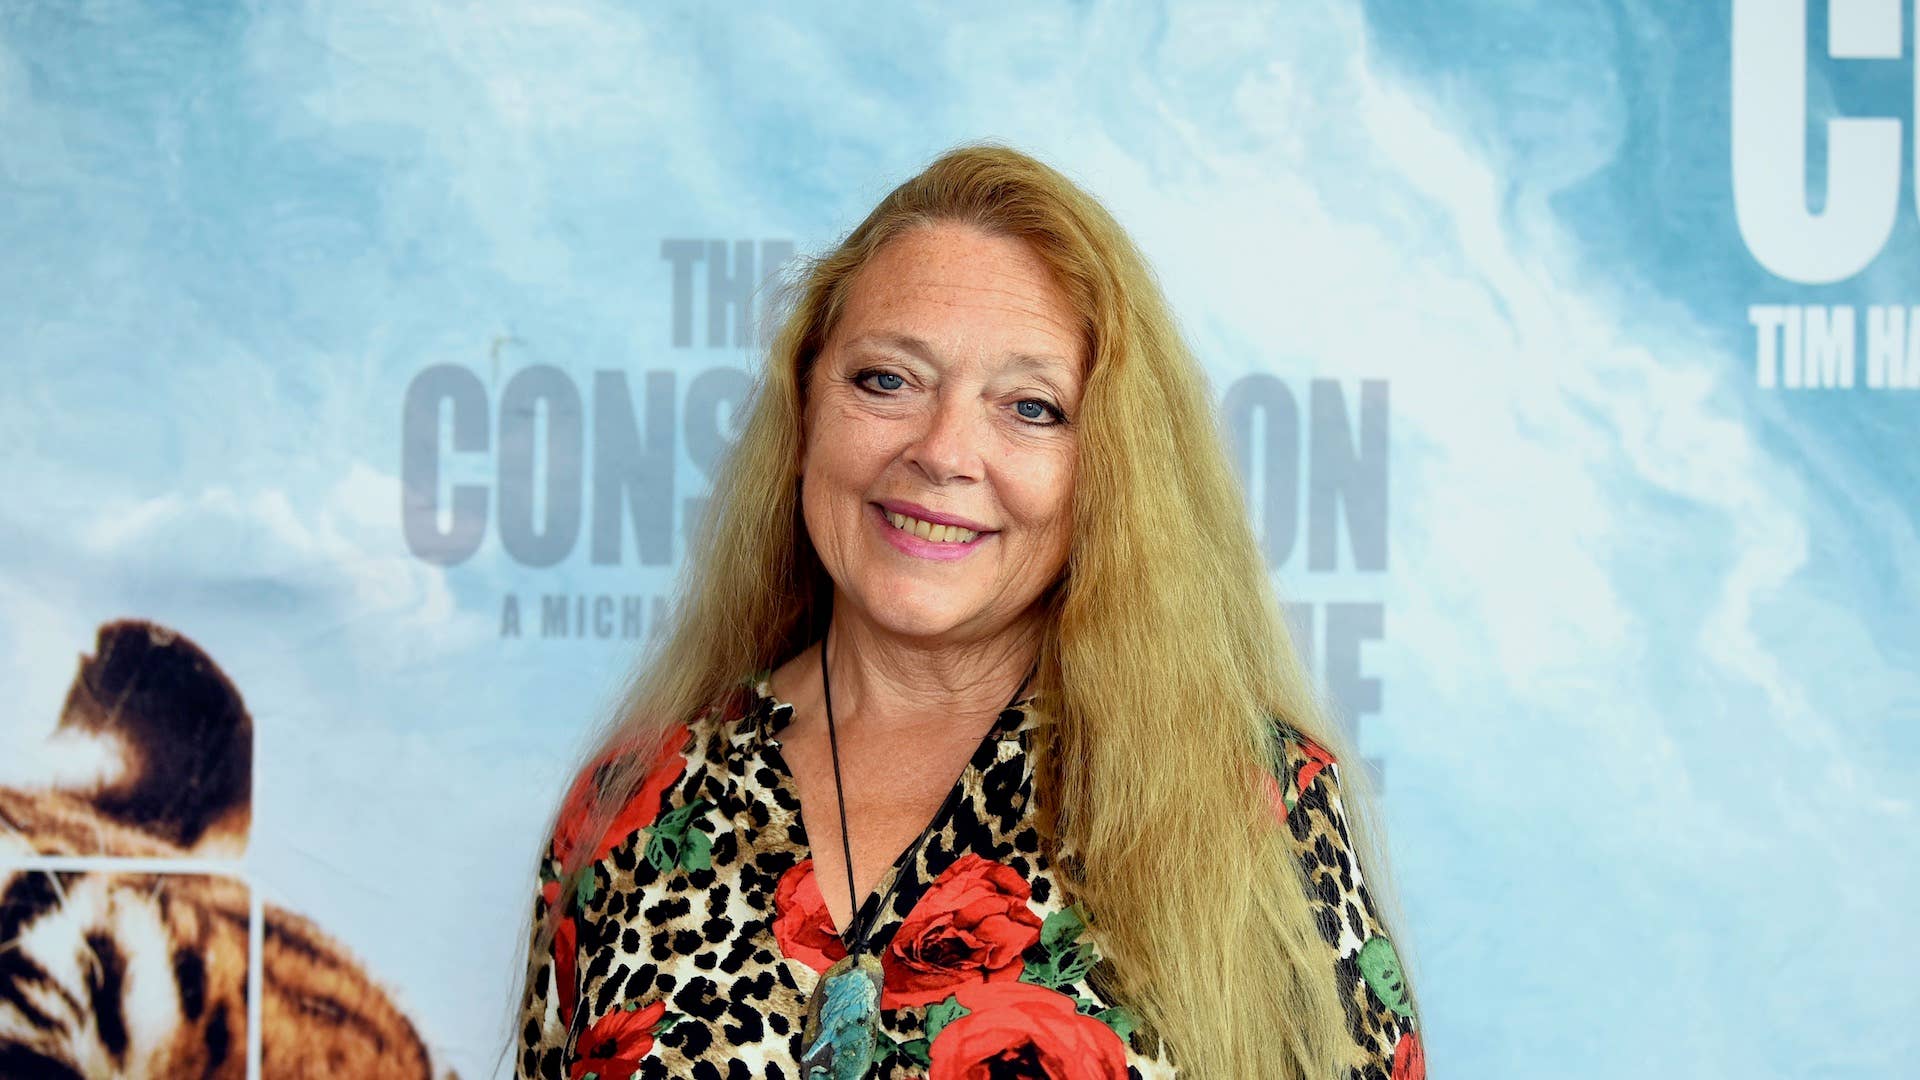 Carole Baskin attends the Los Angeles theatrical premiere of "The Conservation Game"